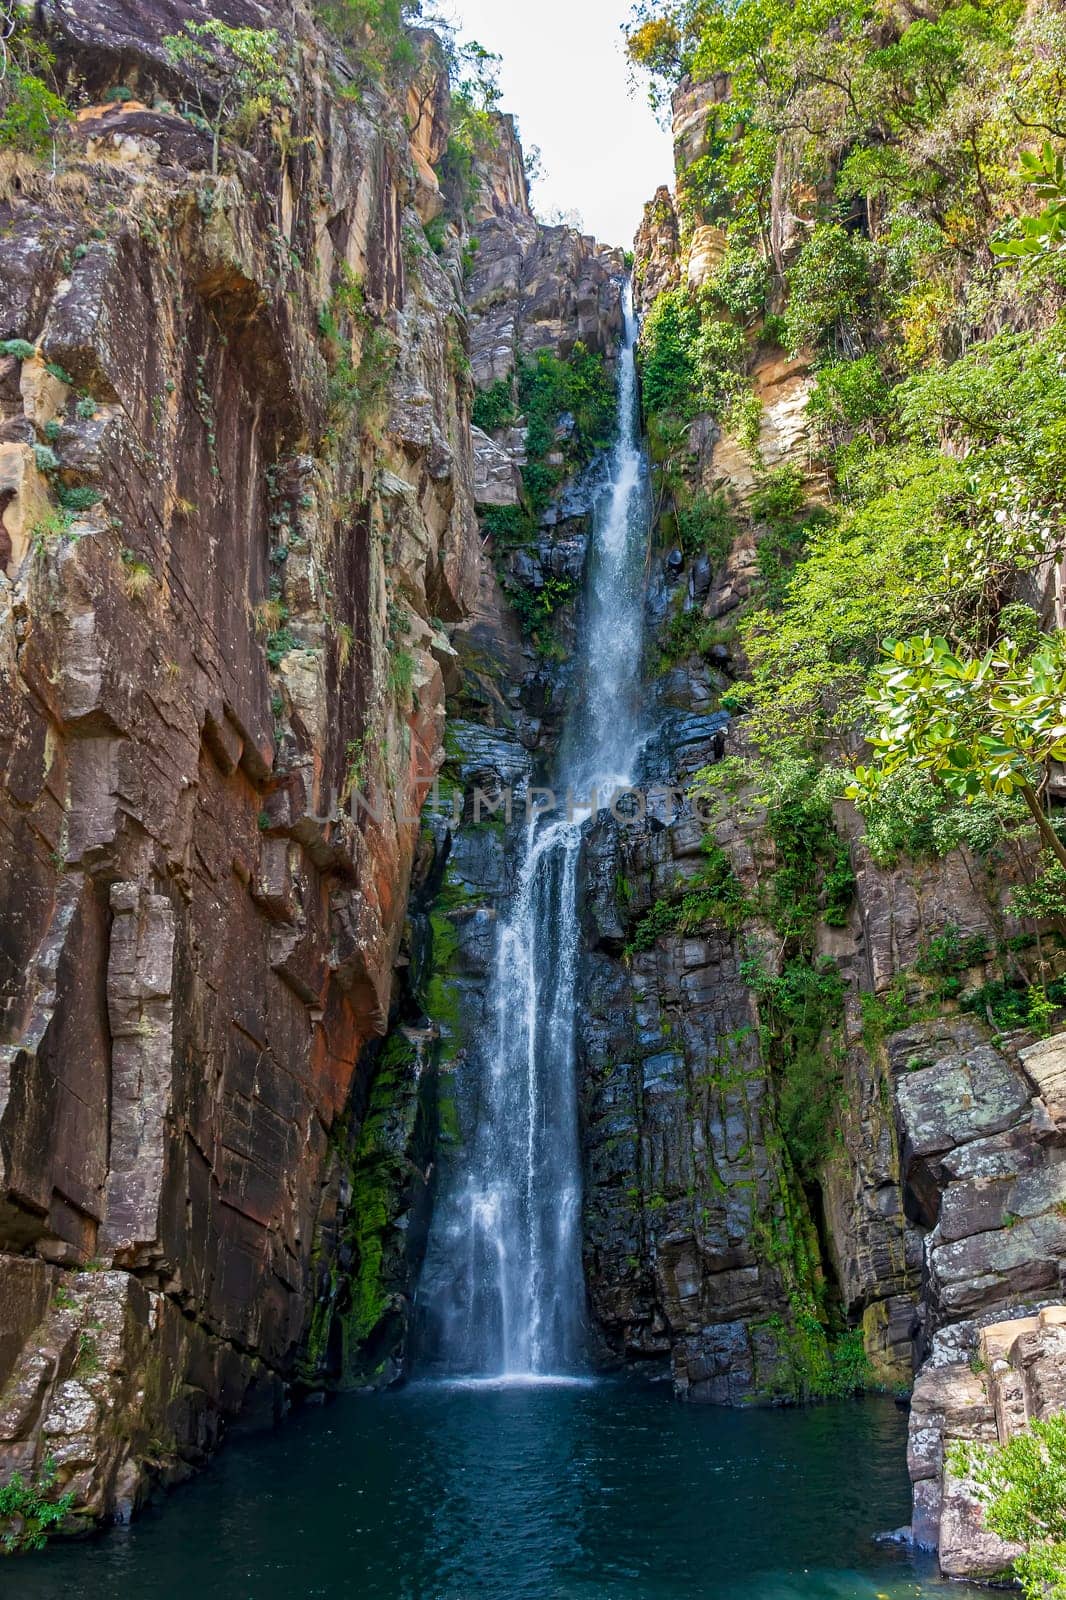 Beautiful waterfall called Veu da Noiva between moss covered rocks and the vegetation of an area with nature preserved in the state of Minas Gerais, Brazil